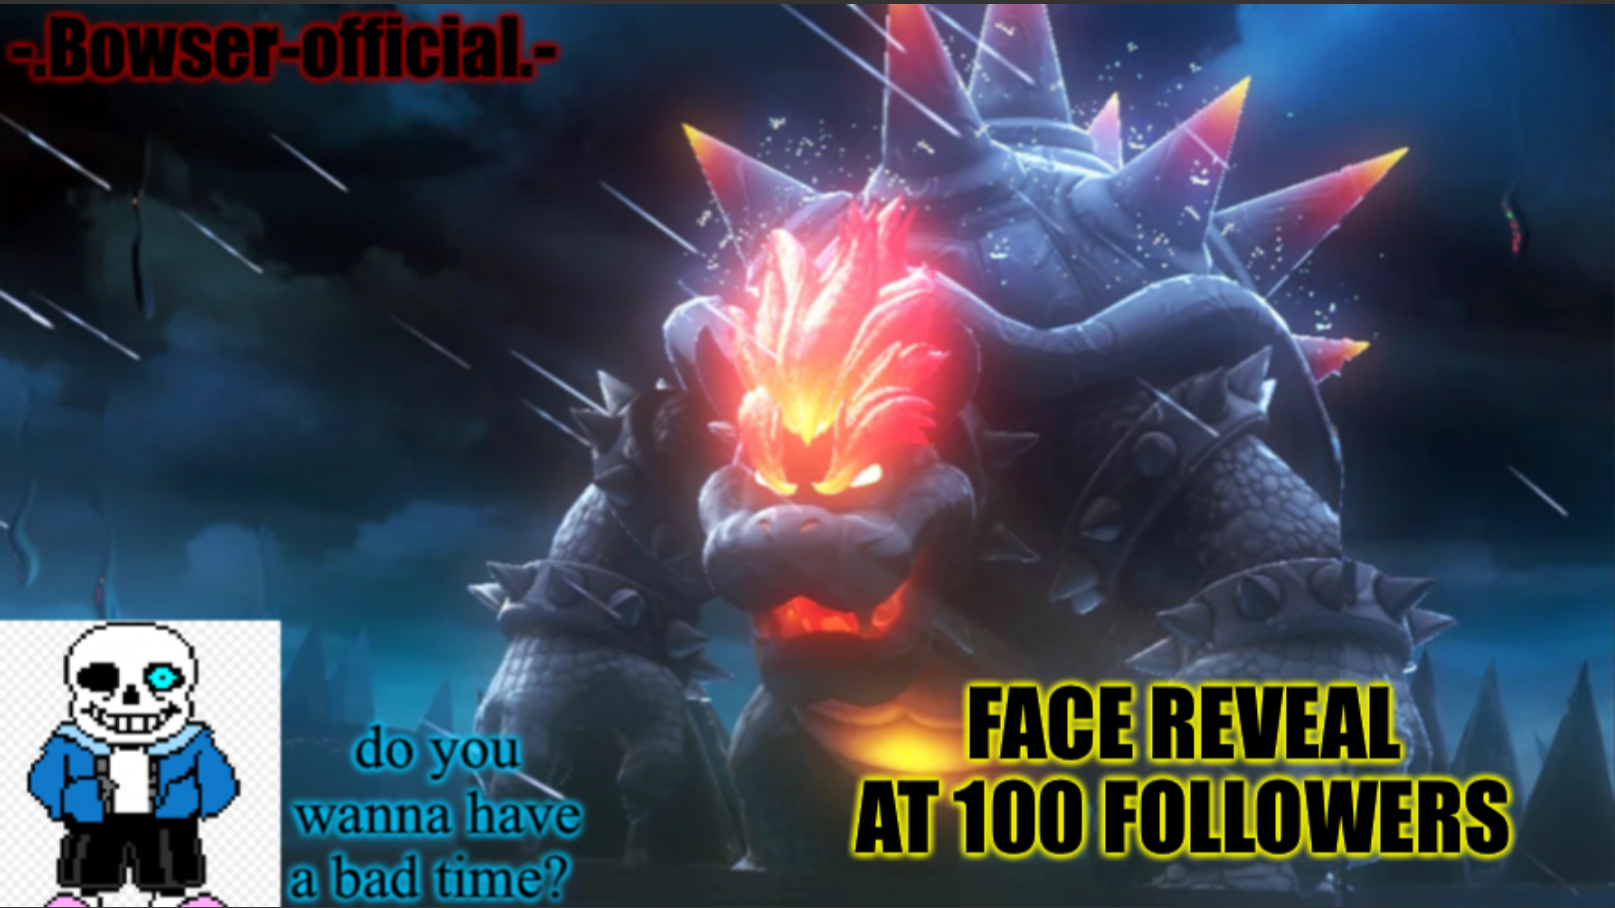 High Quality Bowser-official announcement temp w/ face reveal Blank Meme Template